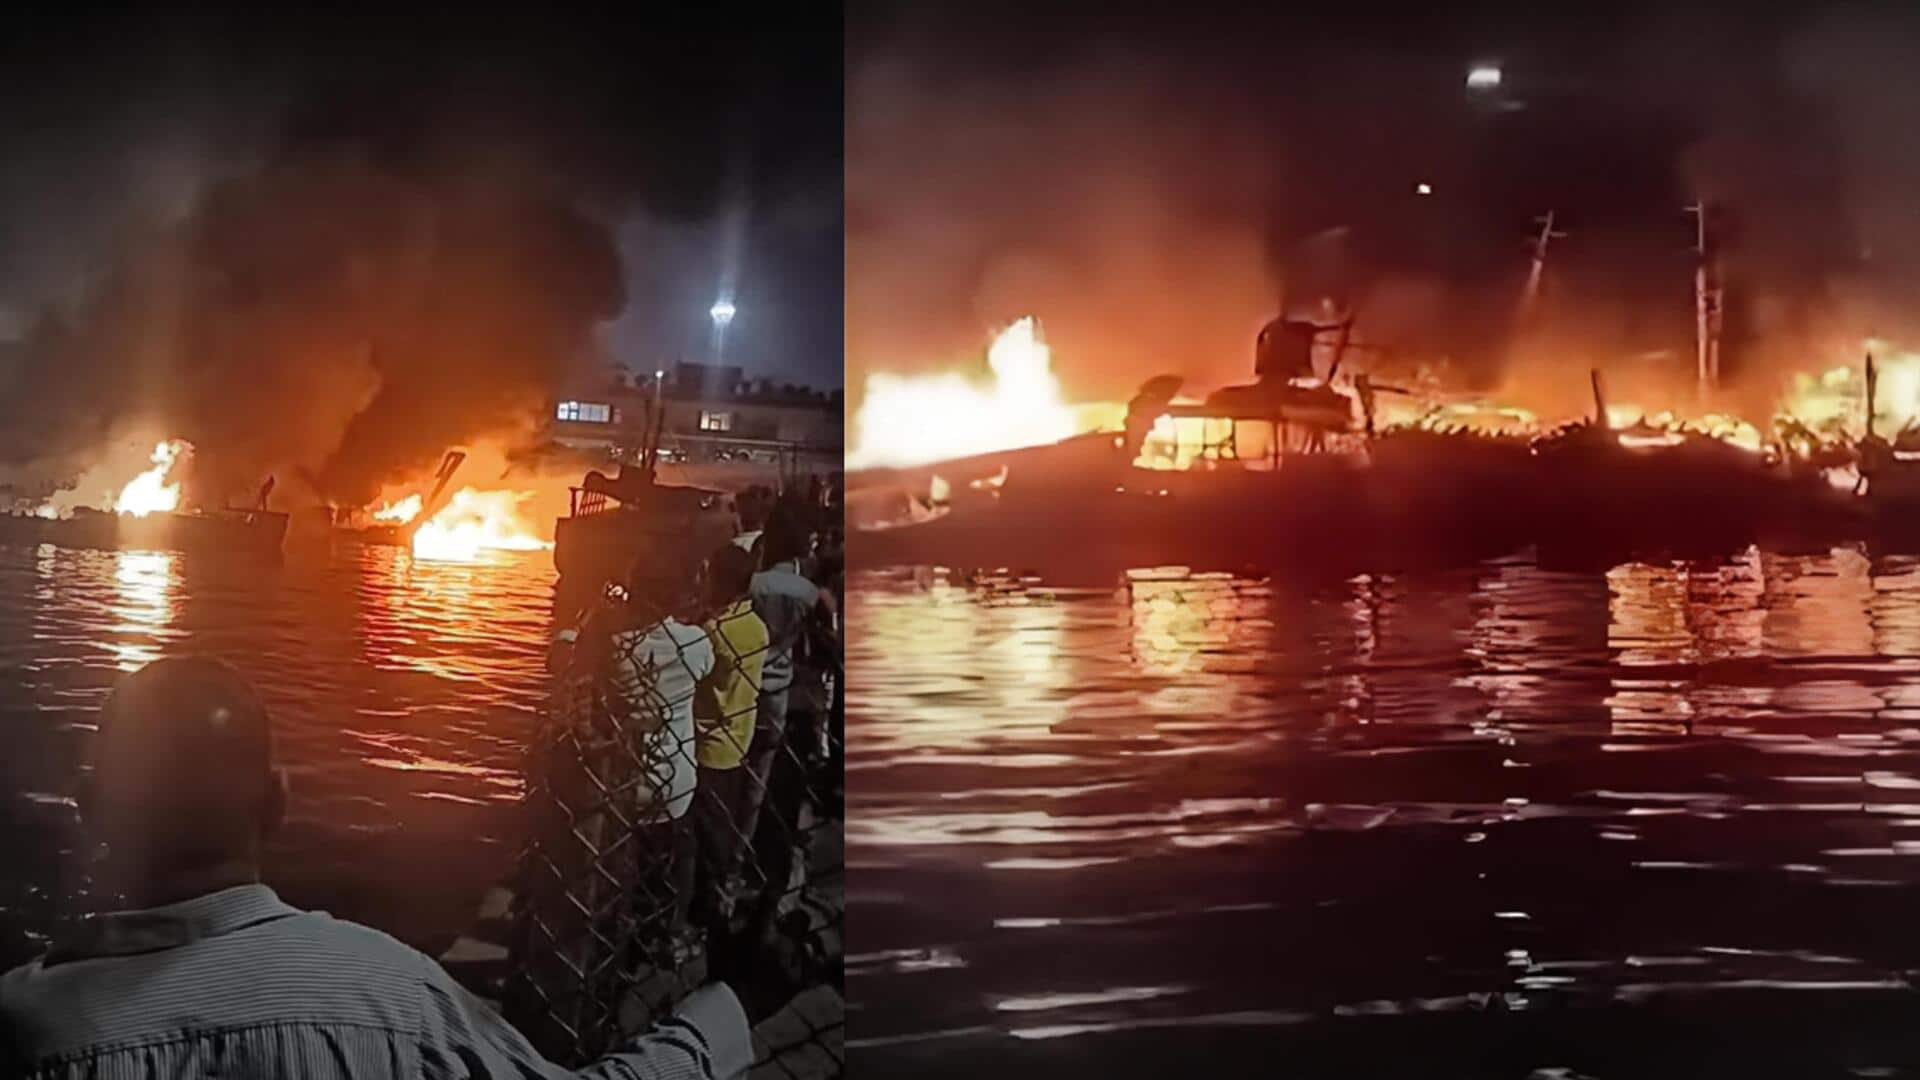 Visakhapatnam: Fire at harbor destroys 35 boats, Navy called in